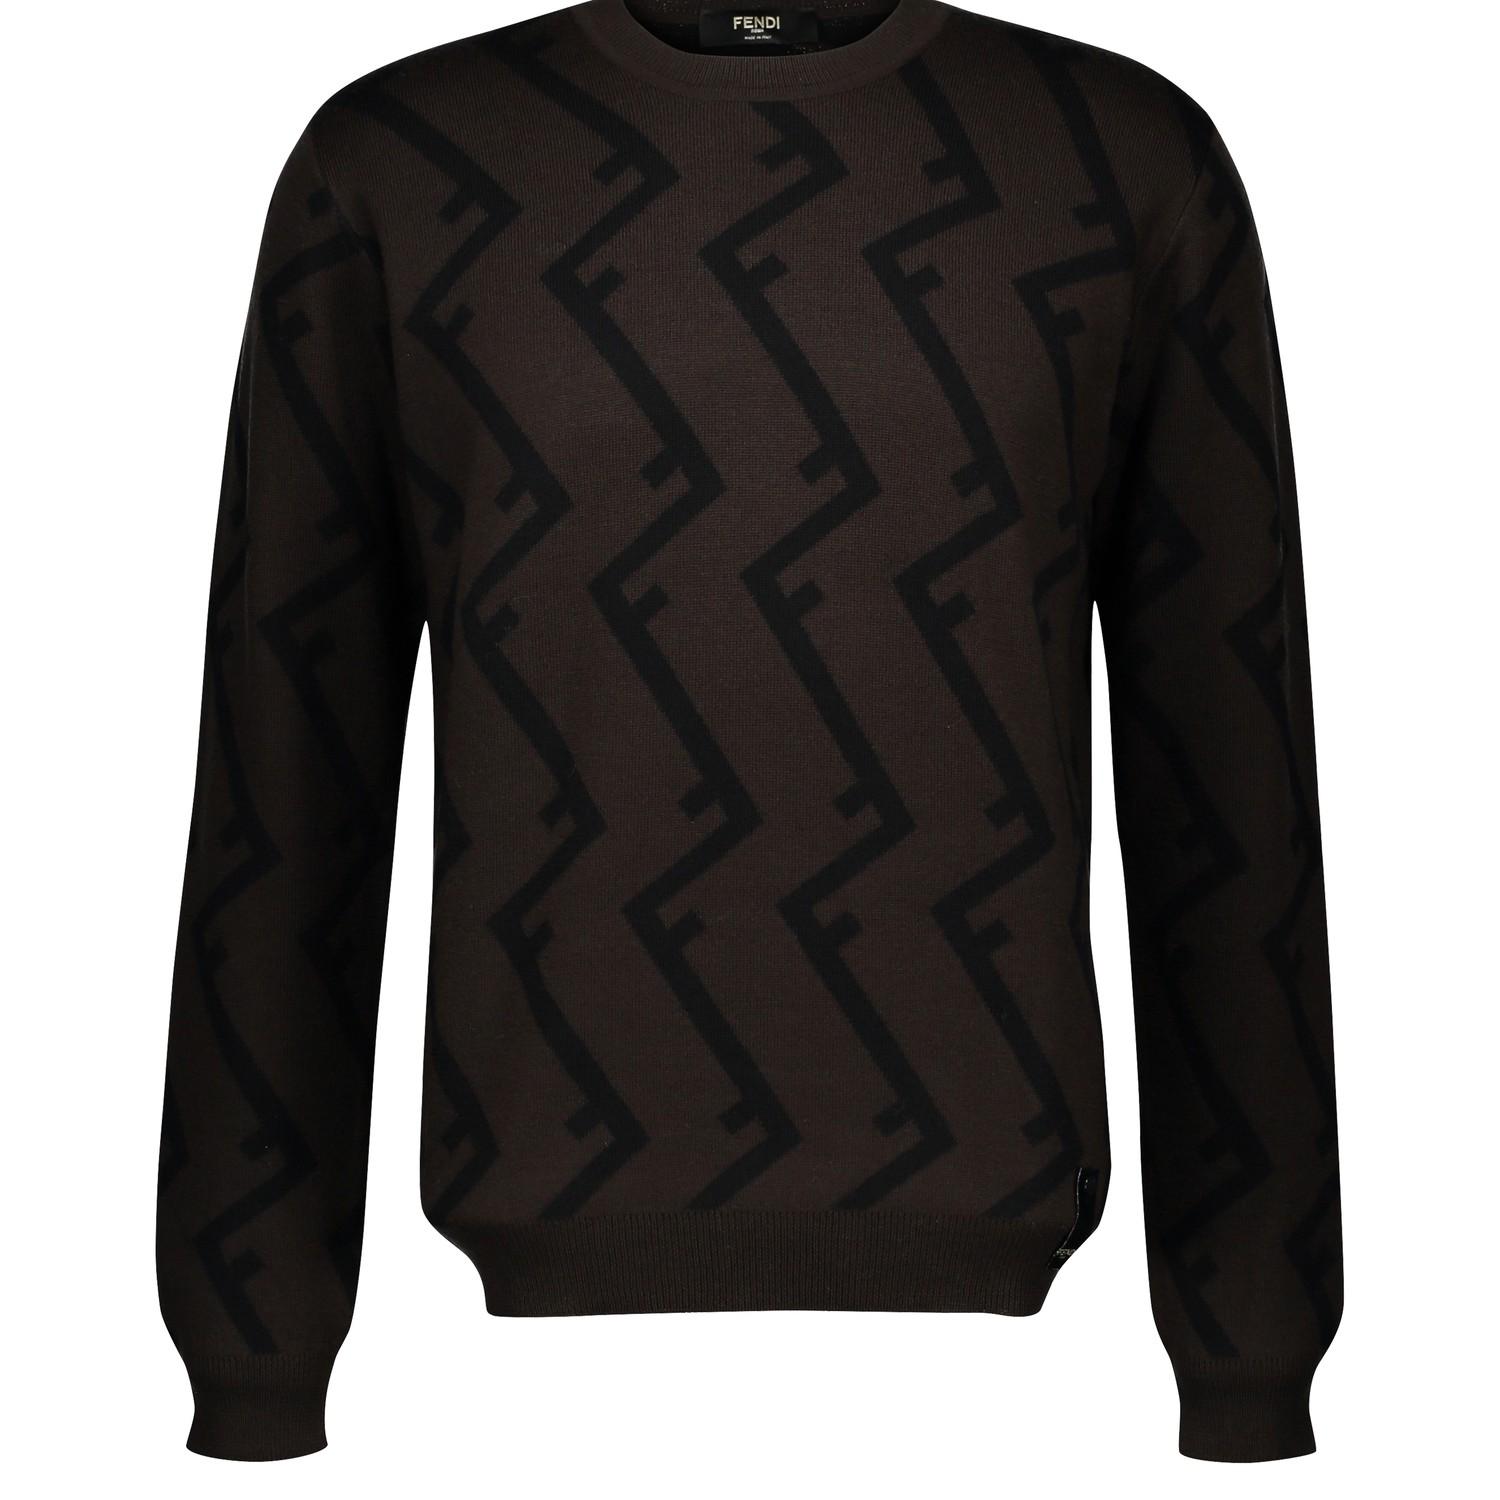 Fendi Round Neck Wool Jumper With F Logo in Black for Men - Save 17% - Lyst